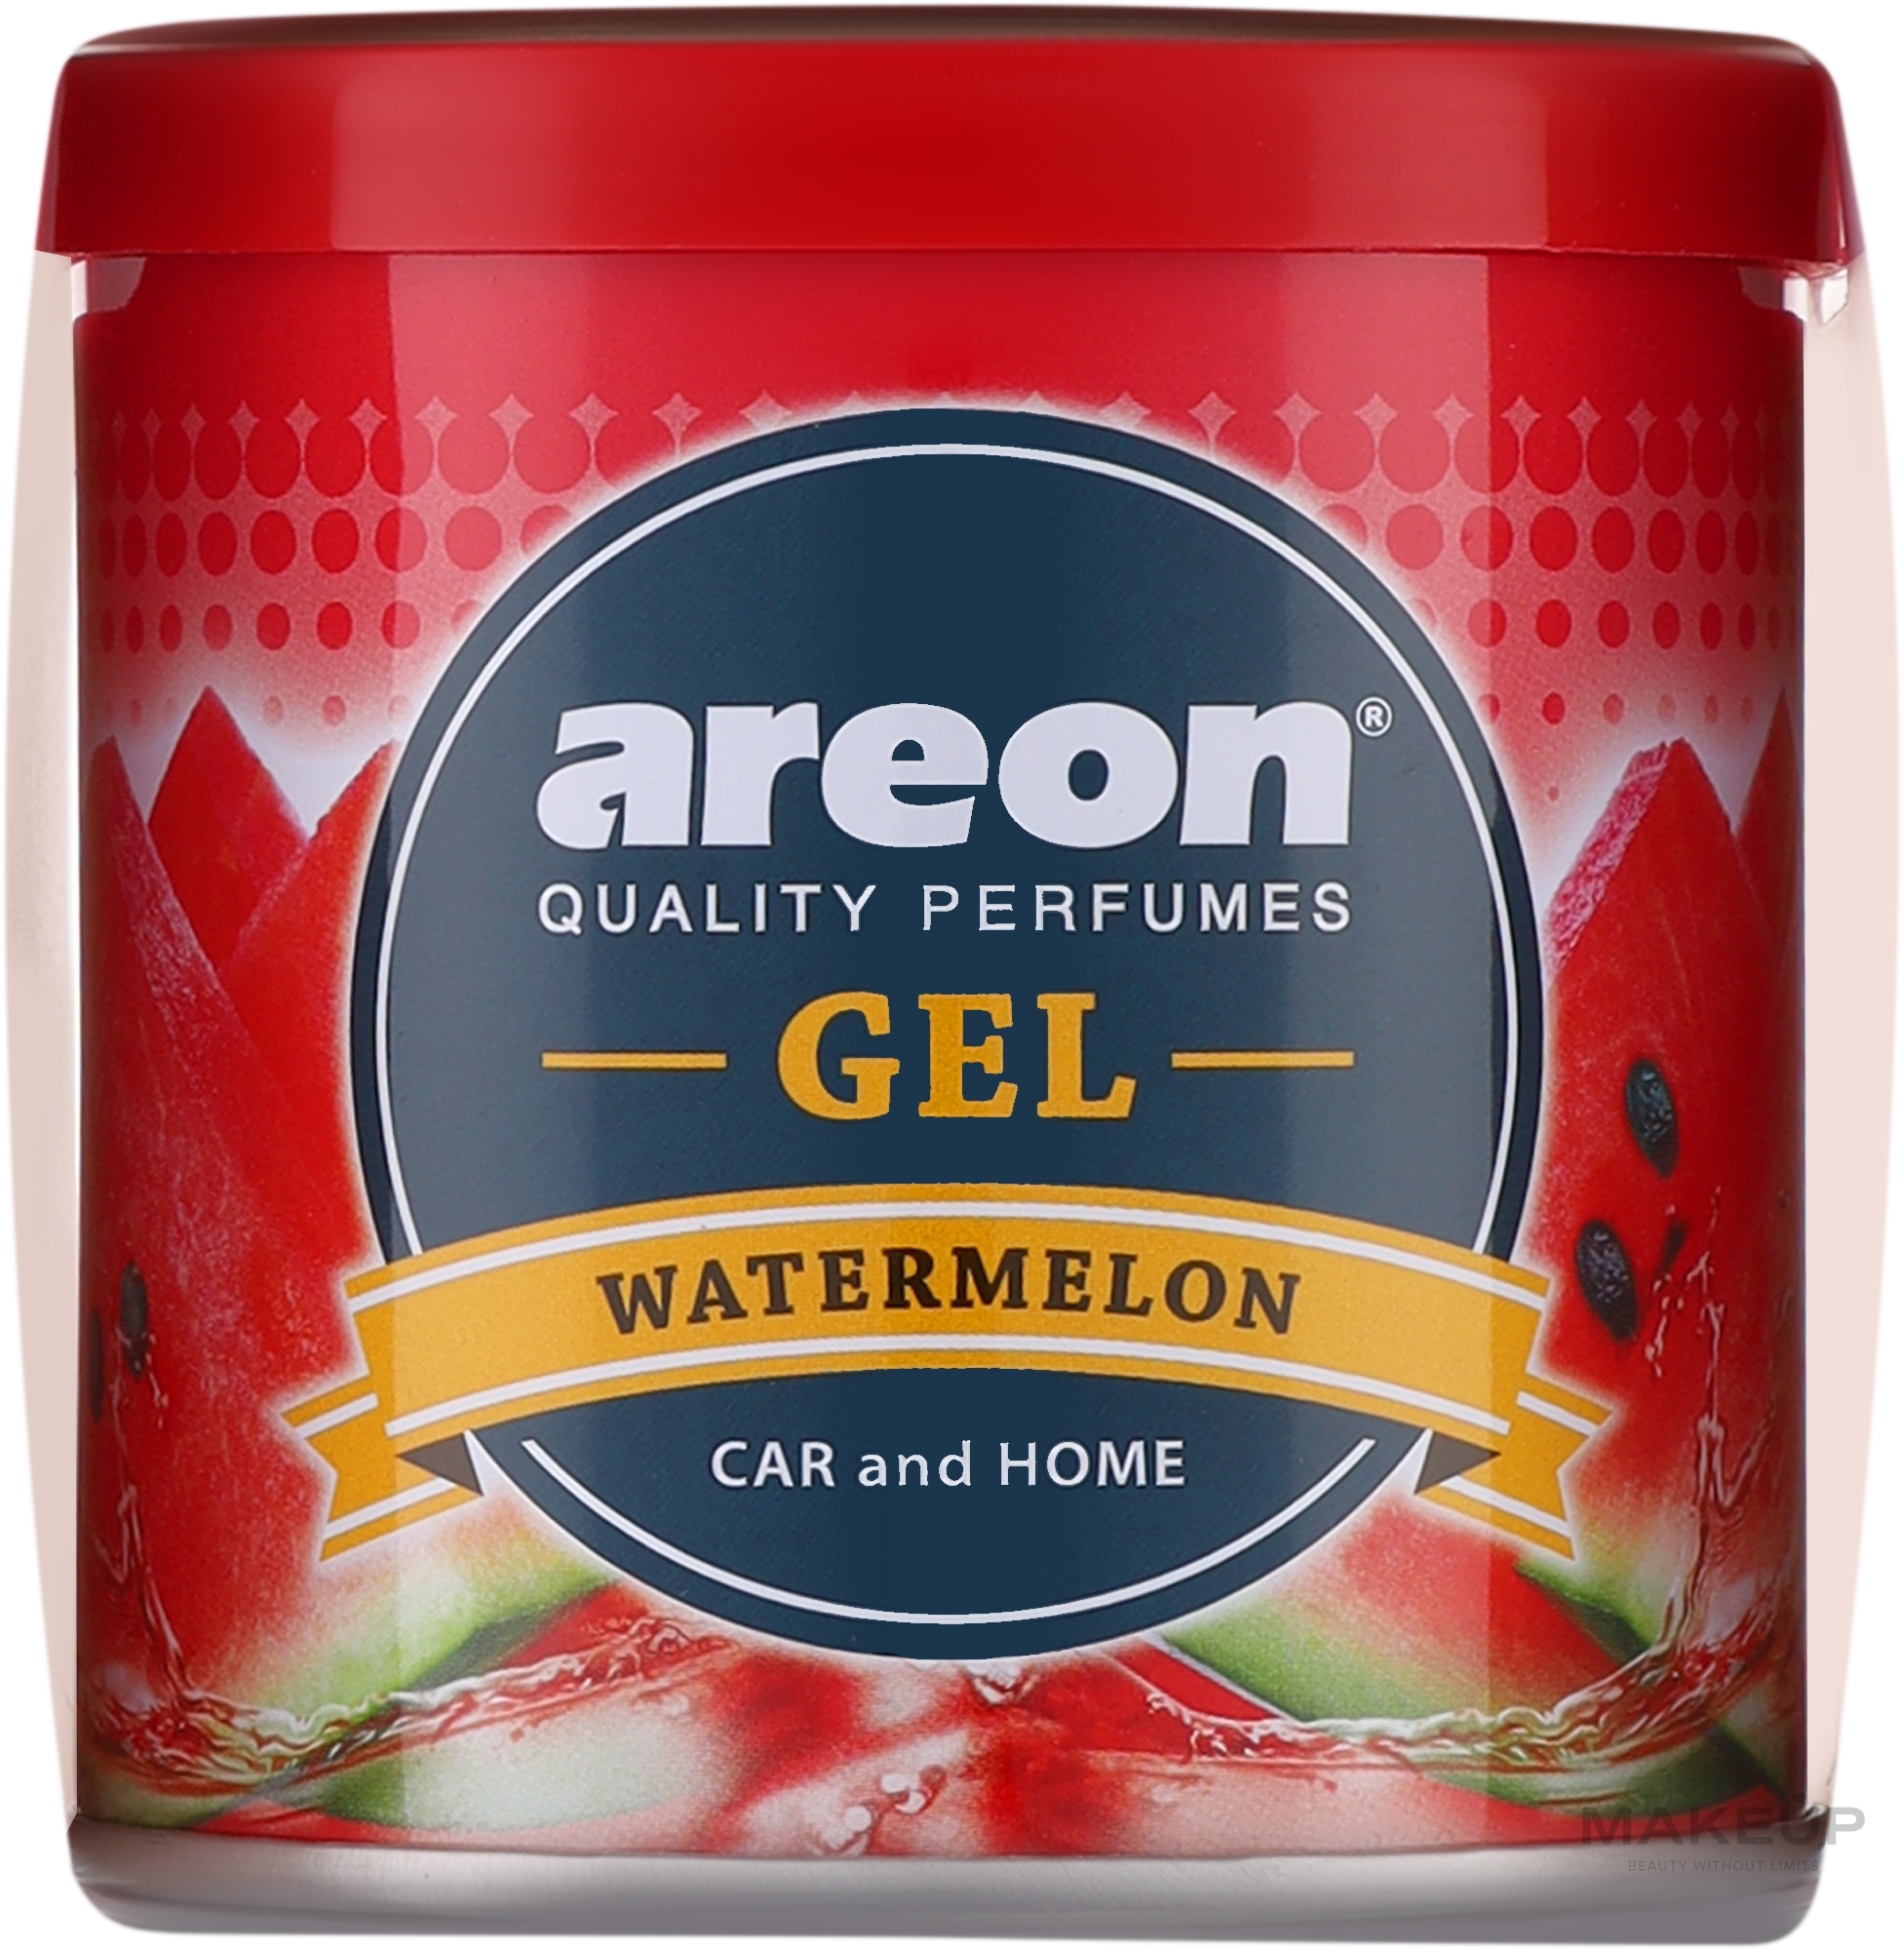 Watermelon Scented Candle - Areon Gel Can Watermelon — photo 80 g